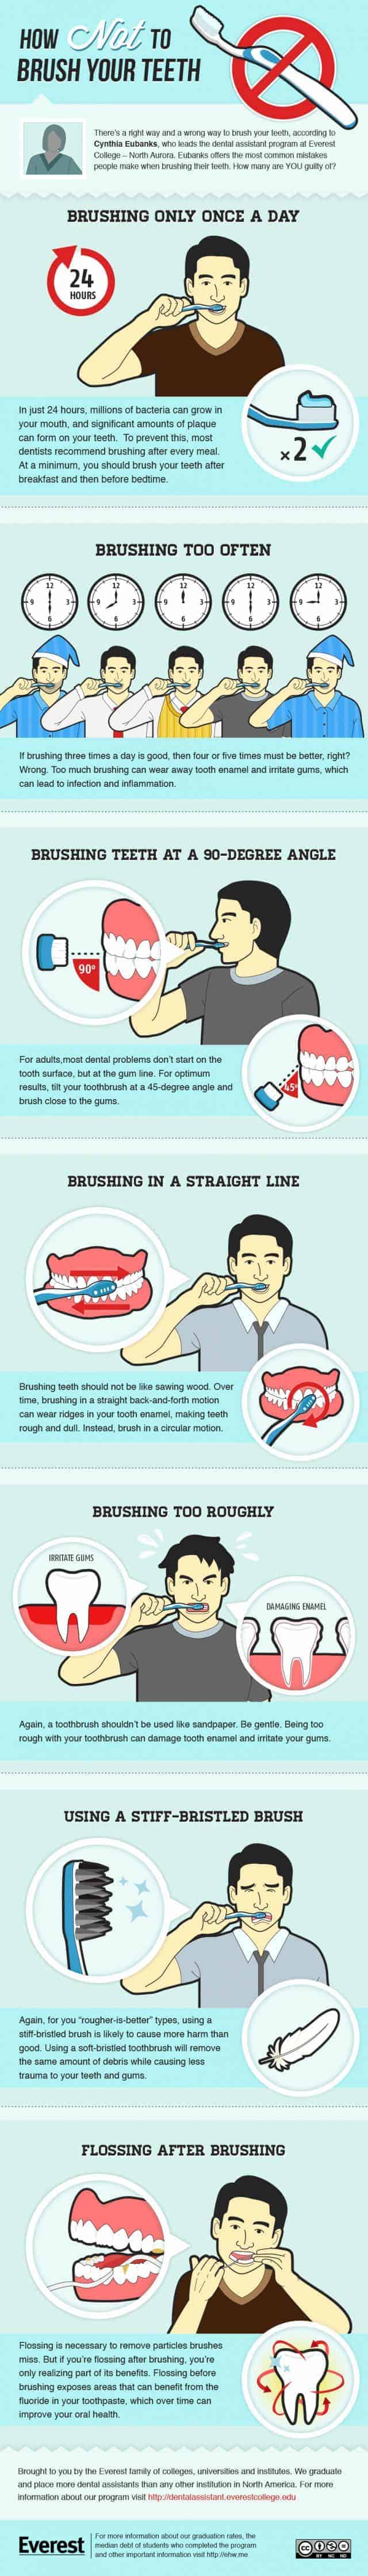 How Not to Brush Your Teeth